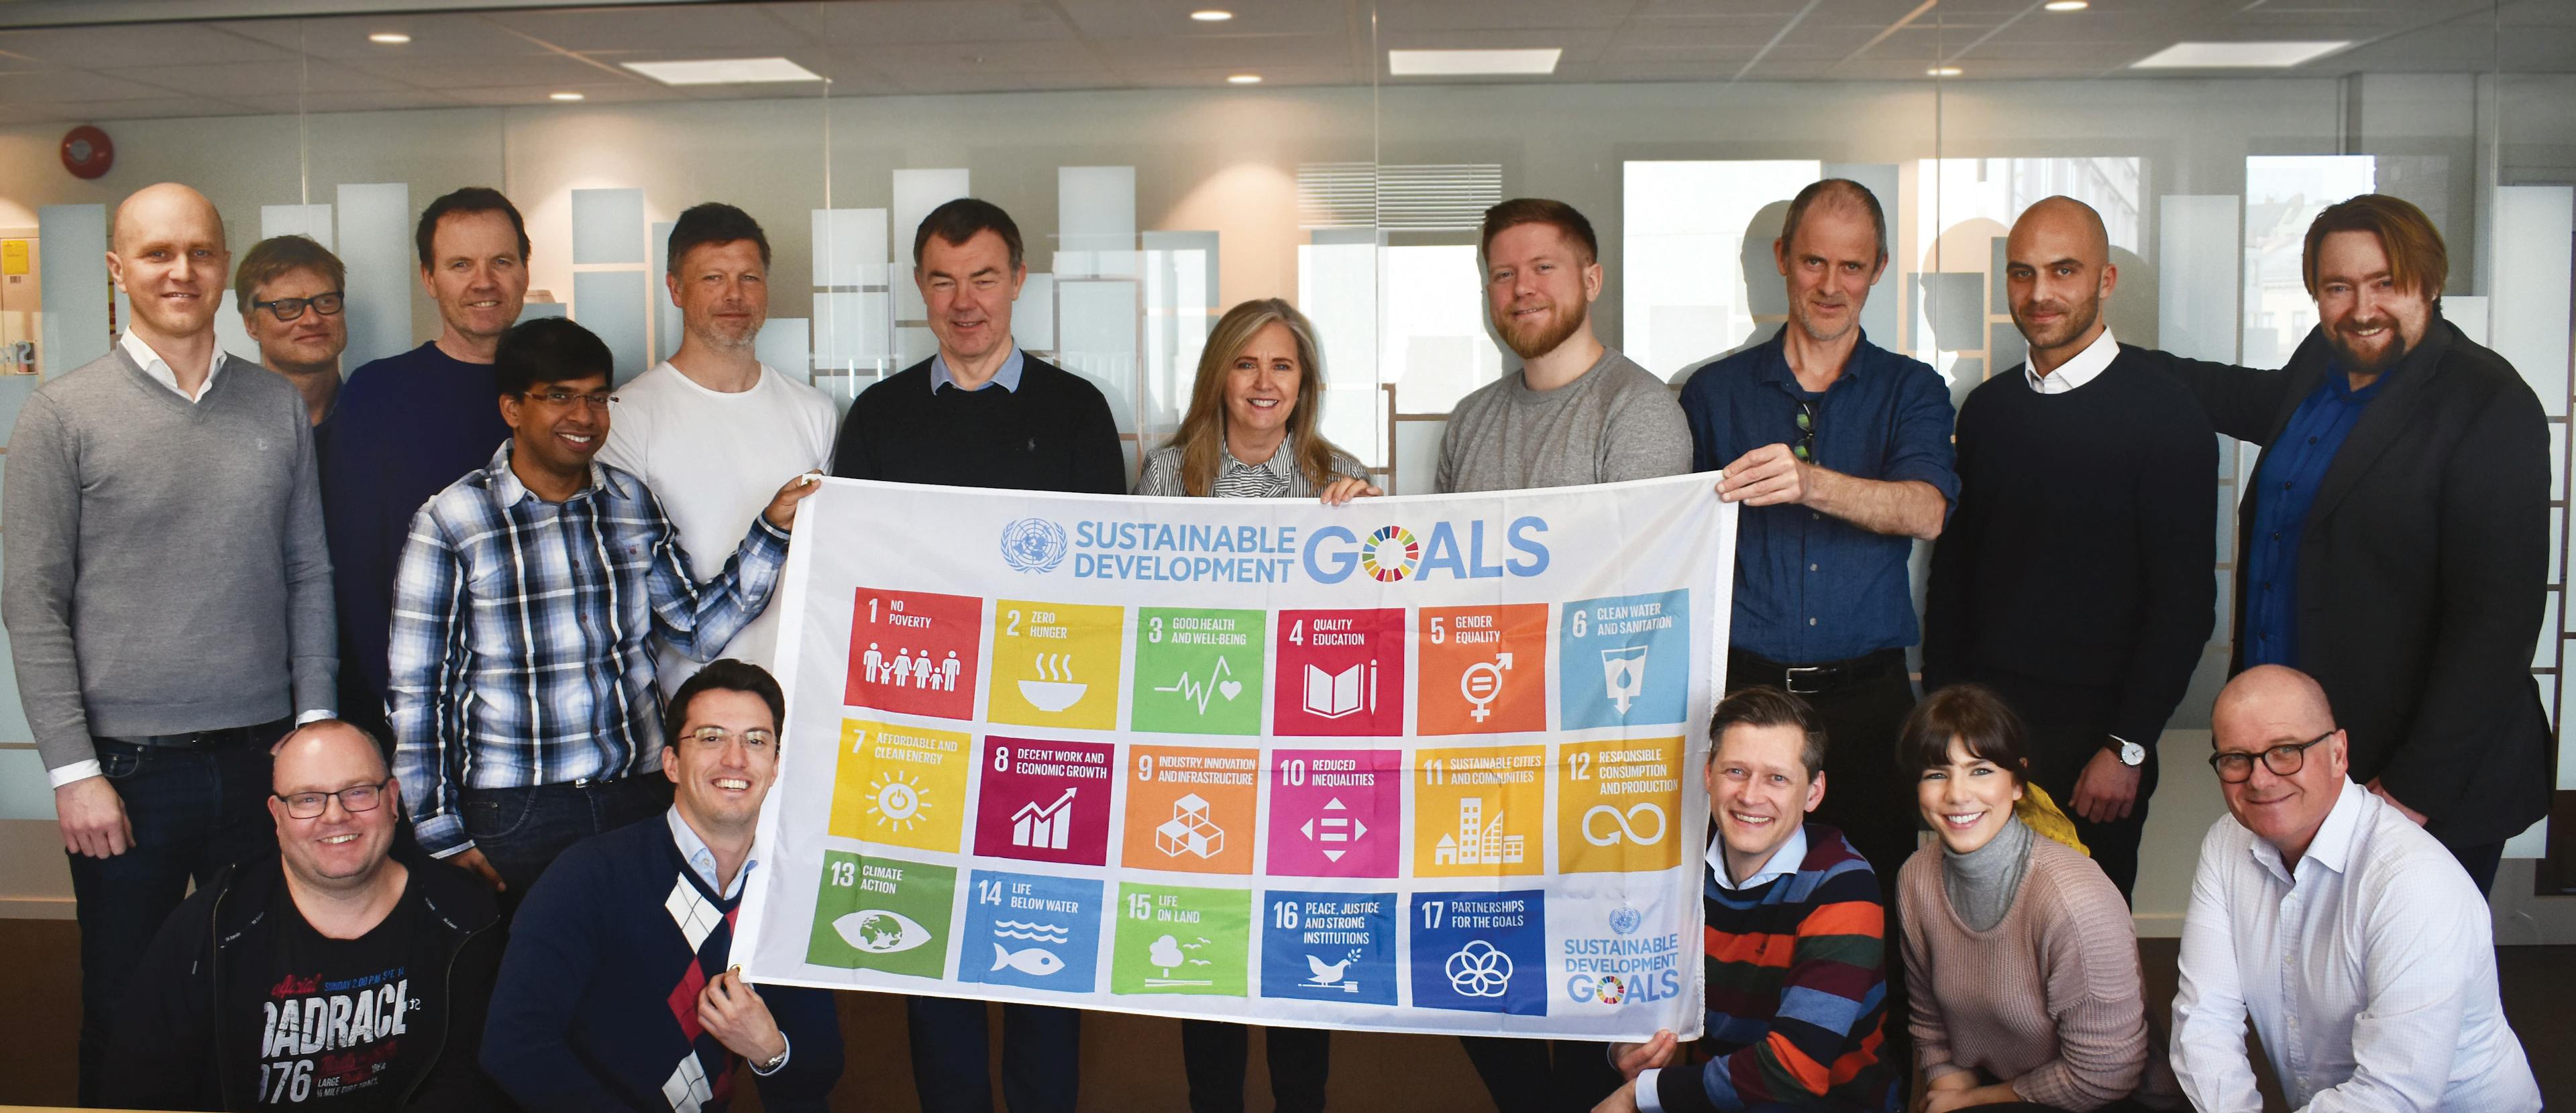 StormGeo team for UN sustainability goals